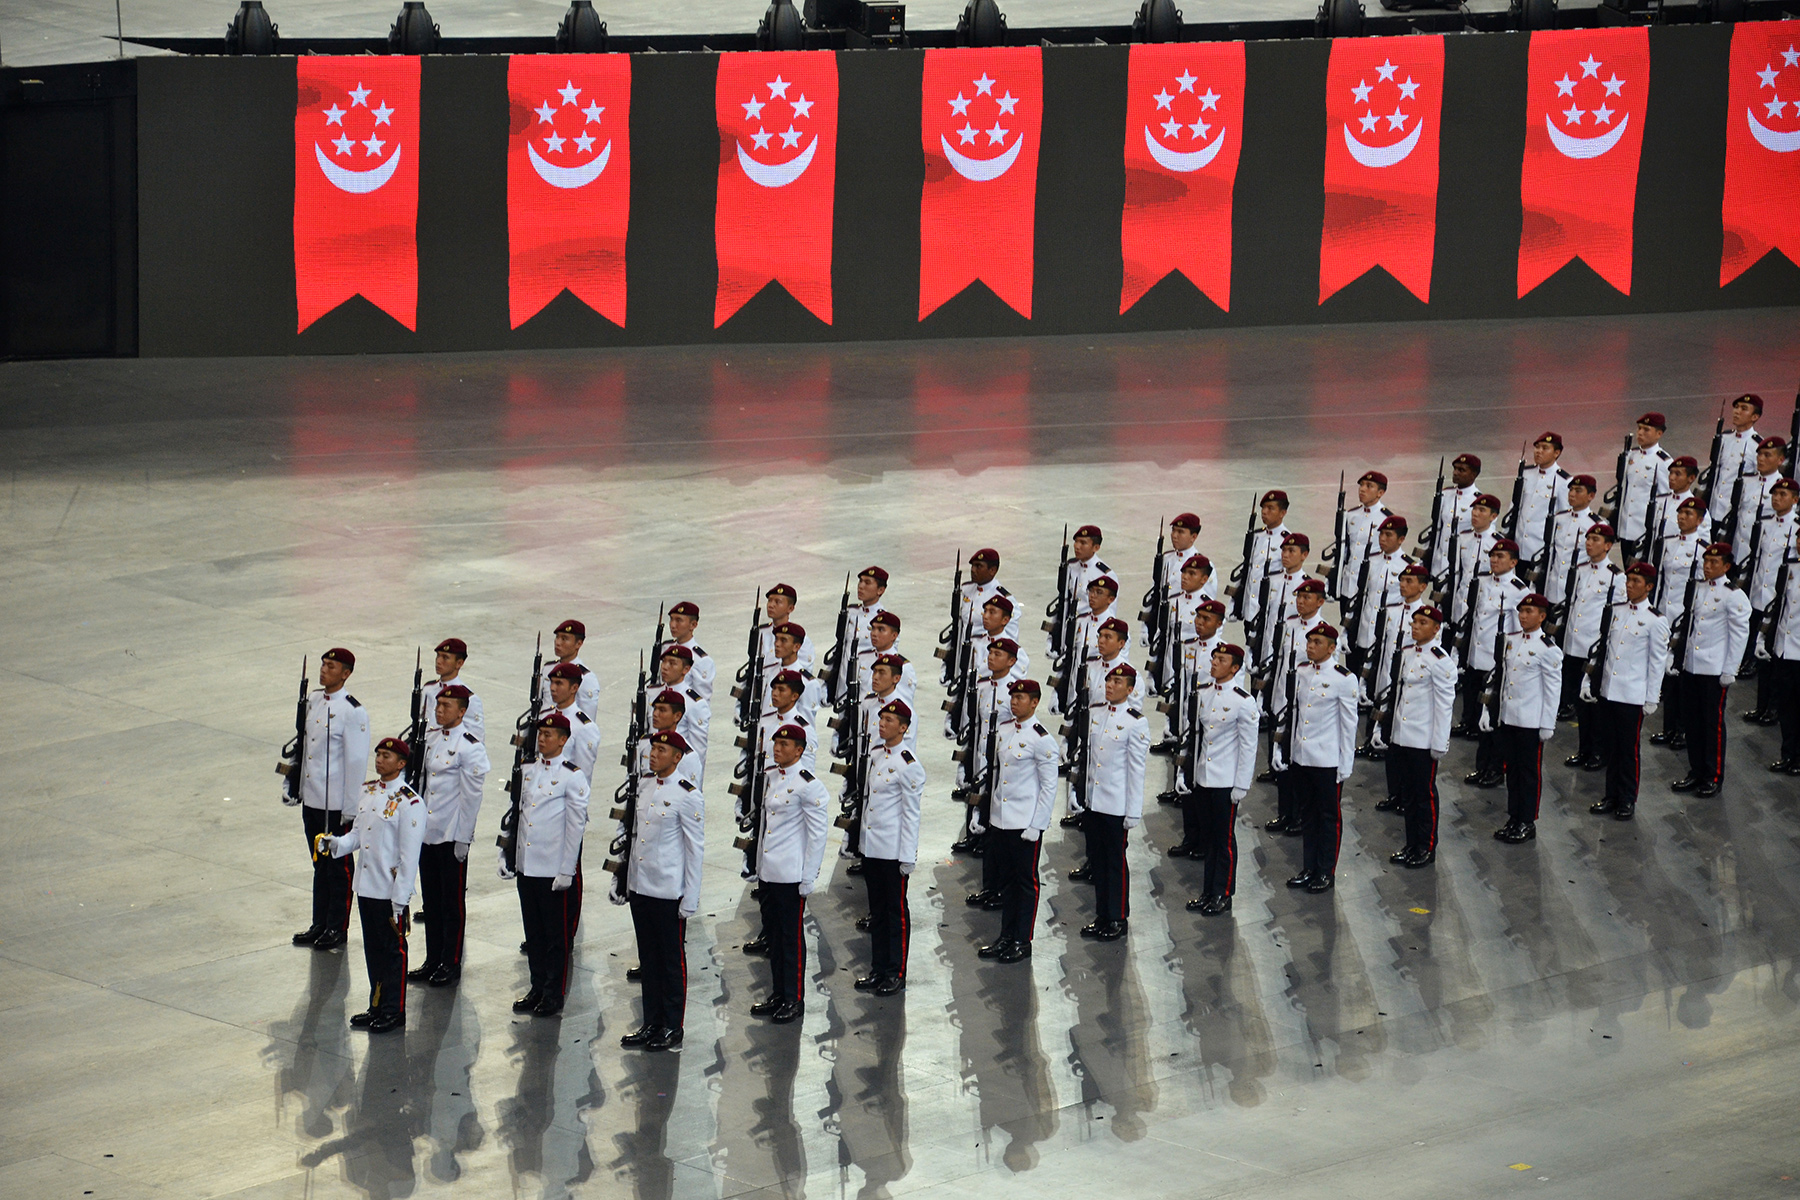 Military parade rehearsal in front of Singapore flags